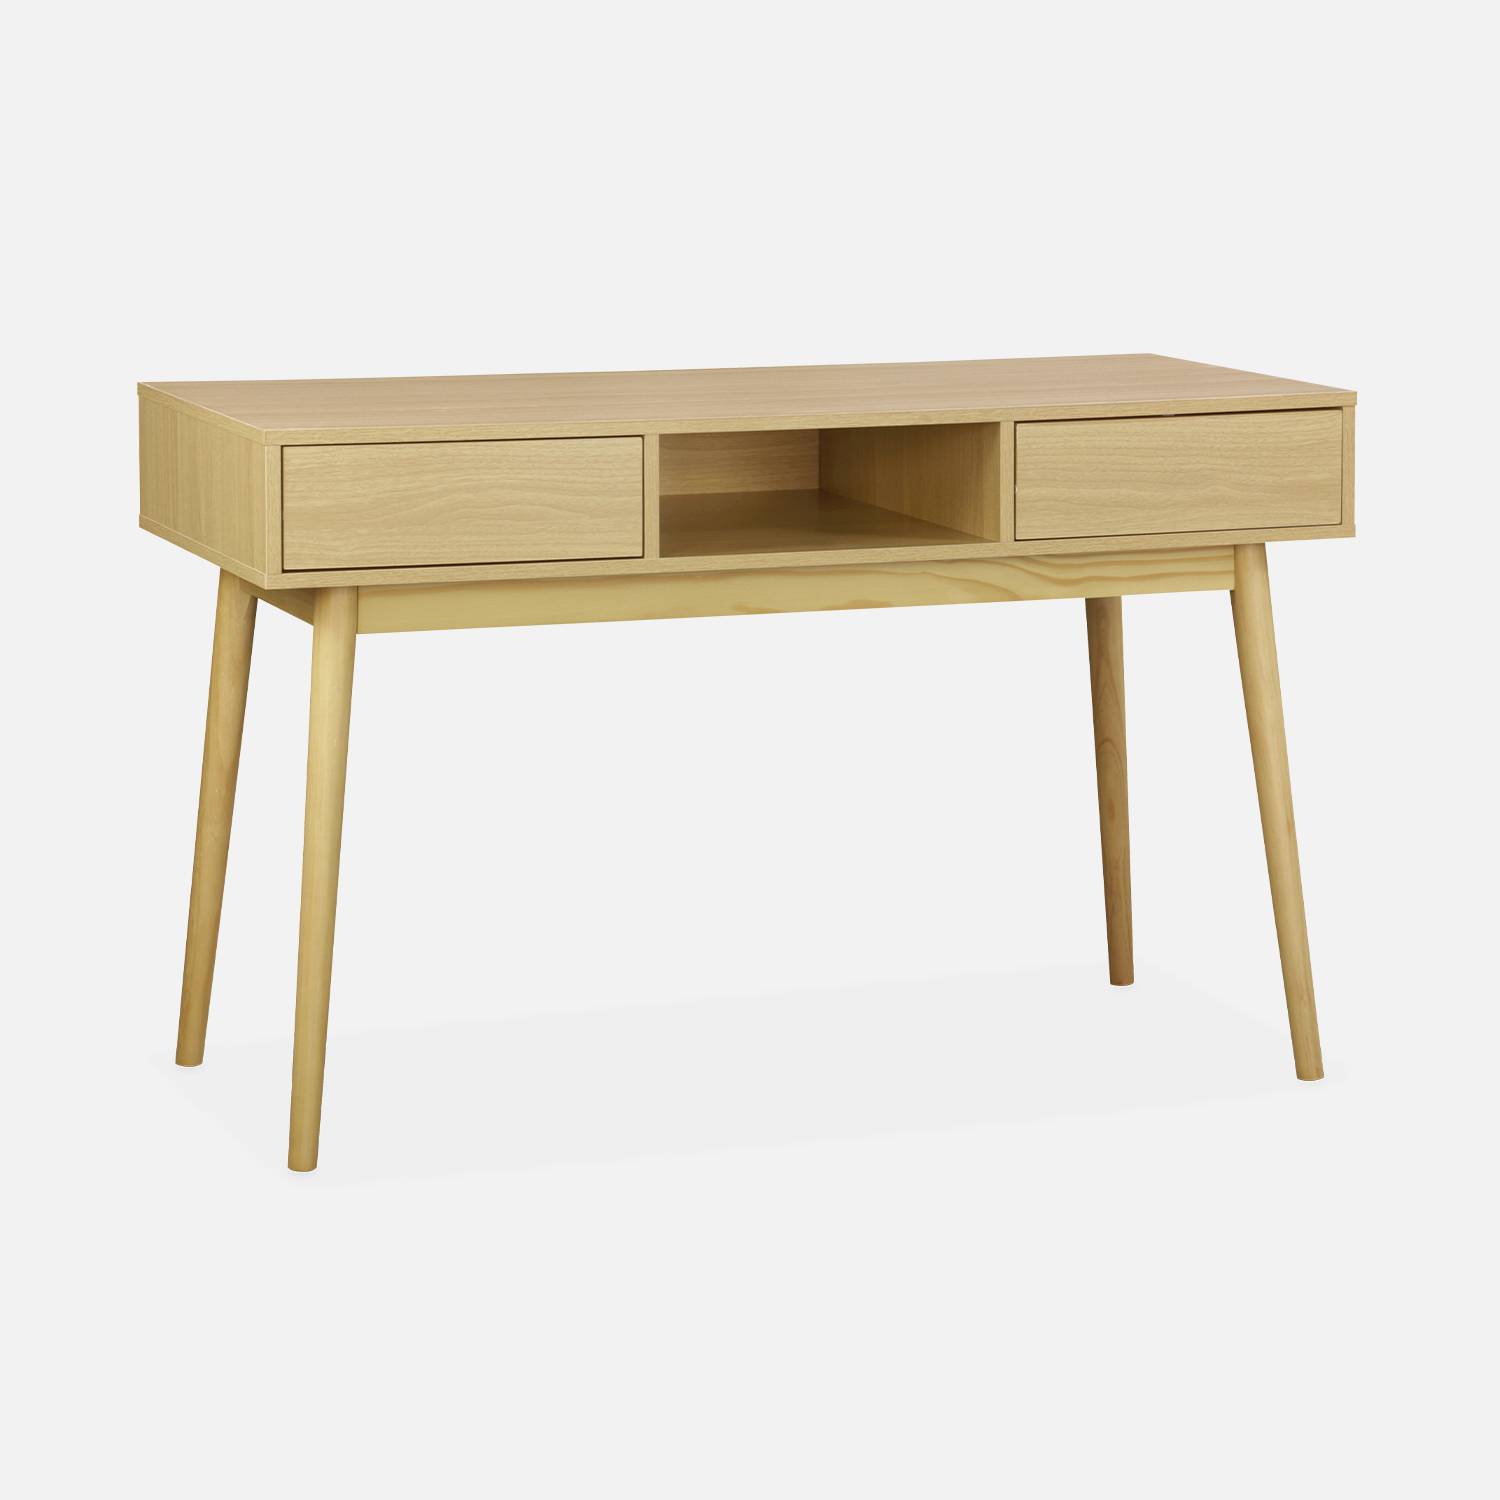 Wood-effect console table with two drawers and one storage nook, 120x48x75cm - Mika - Natural Wood colour Photo2